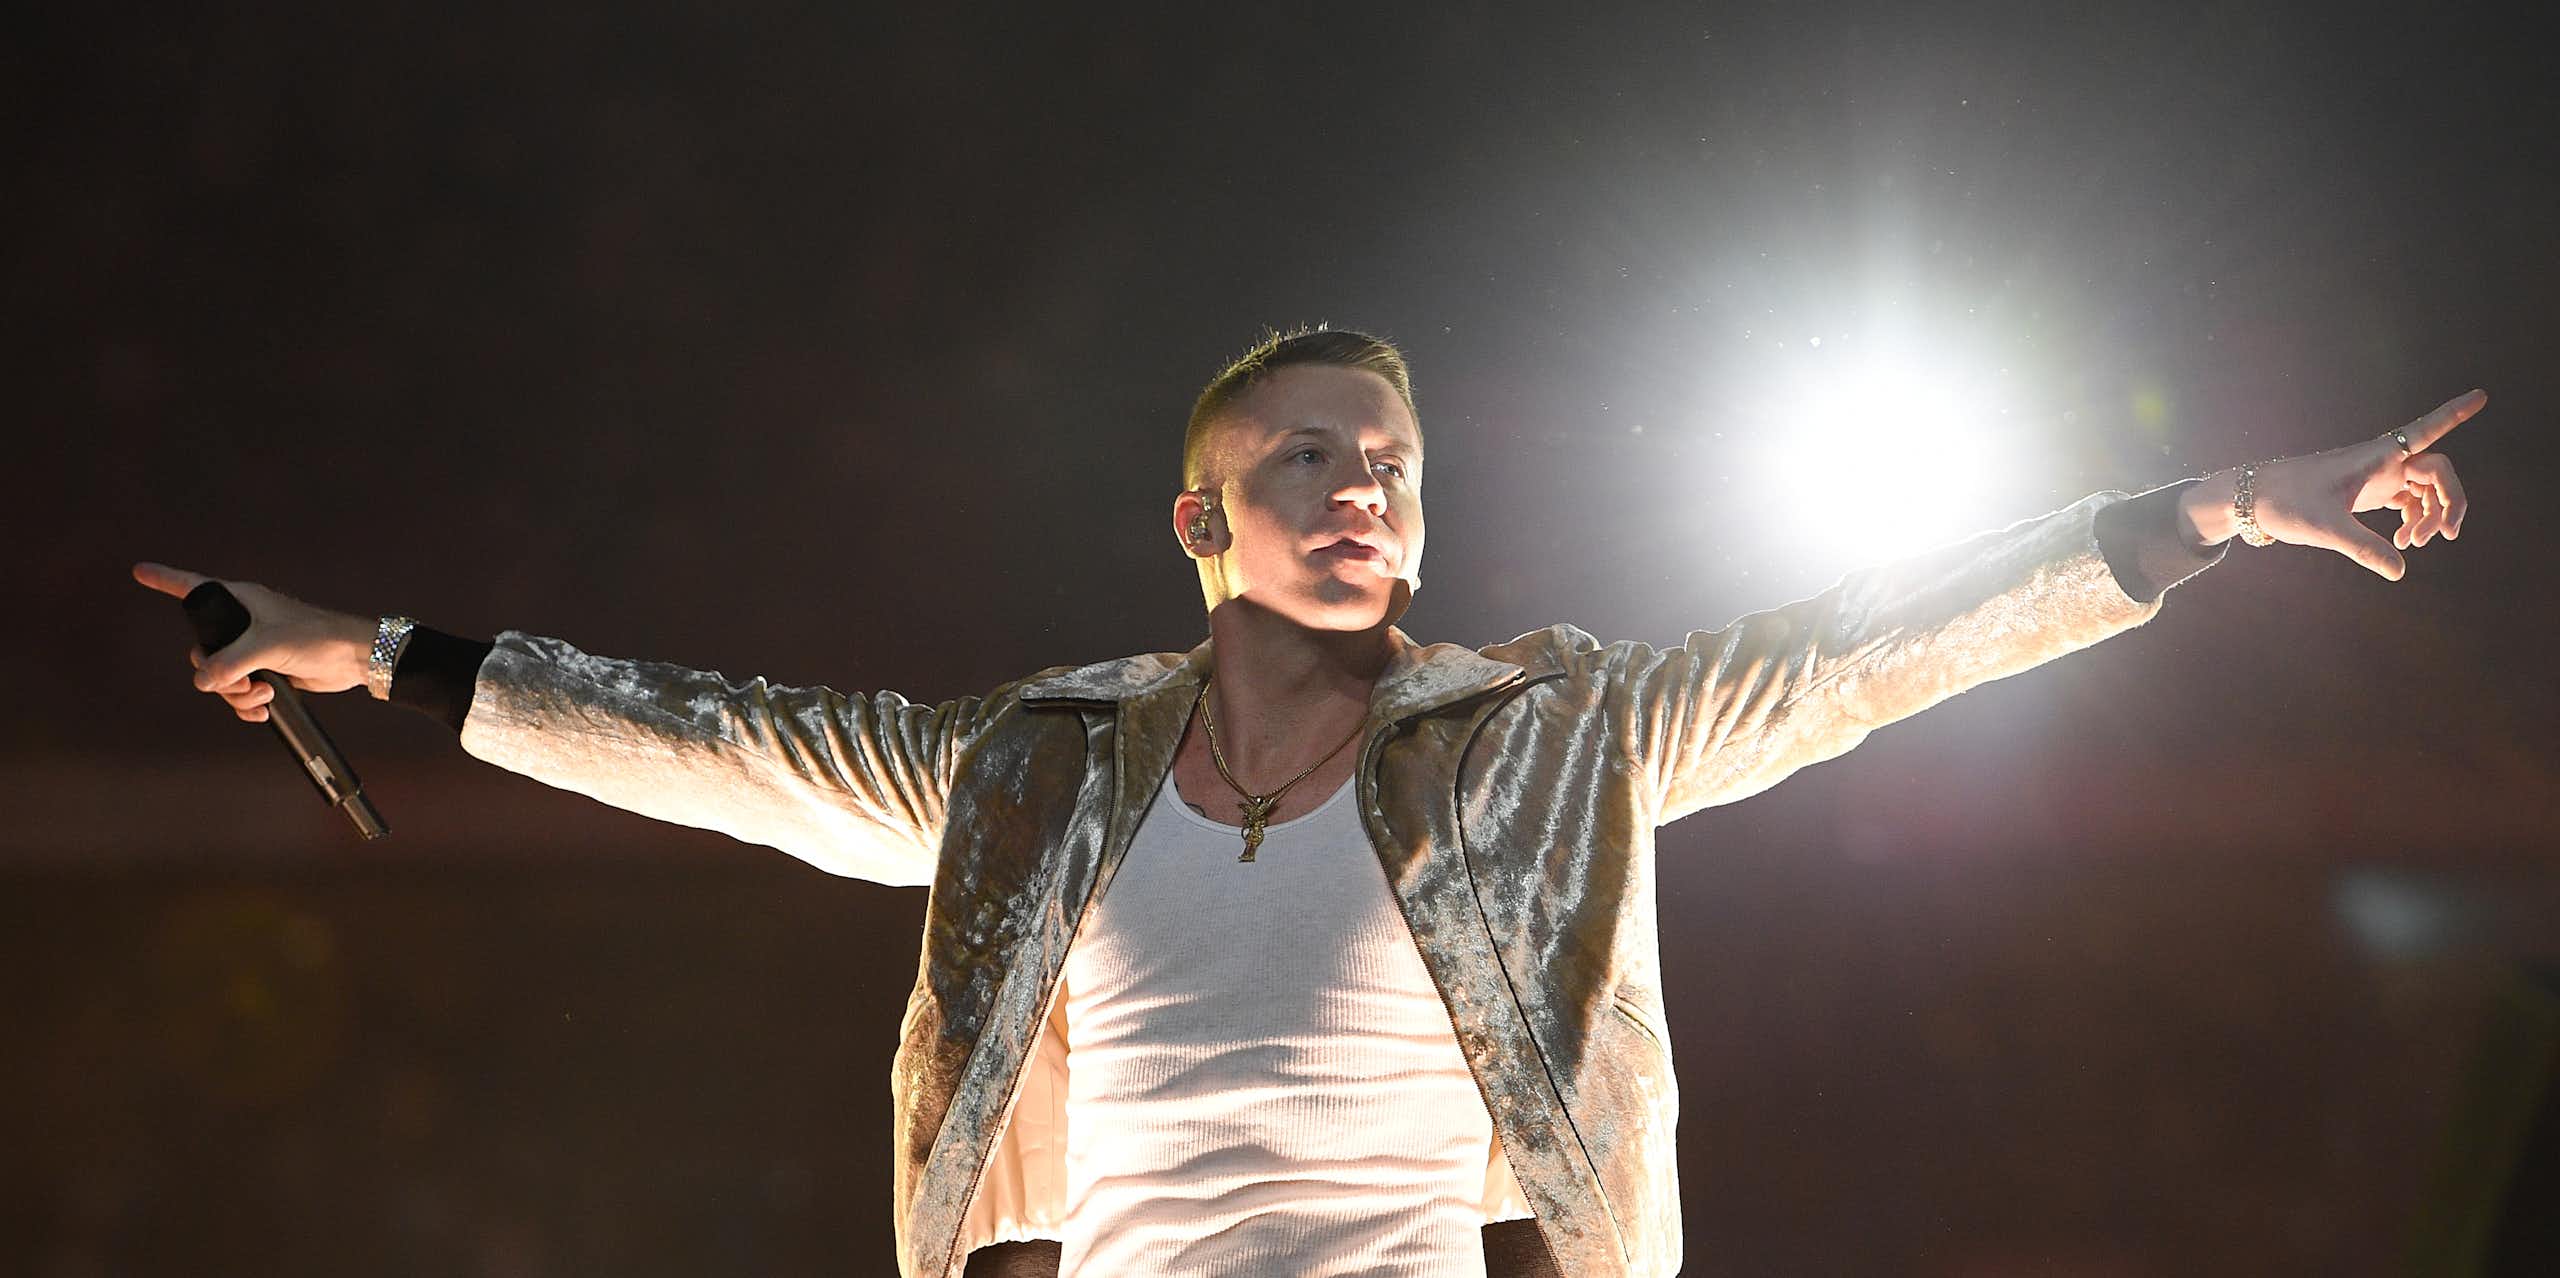 Hind’s Hall is Macklemore’s bold new pro-Palestine anthem. What might it actually achieve?